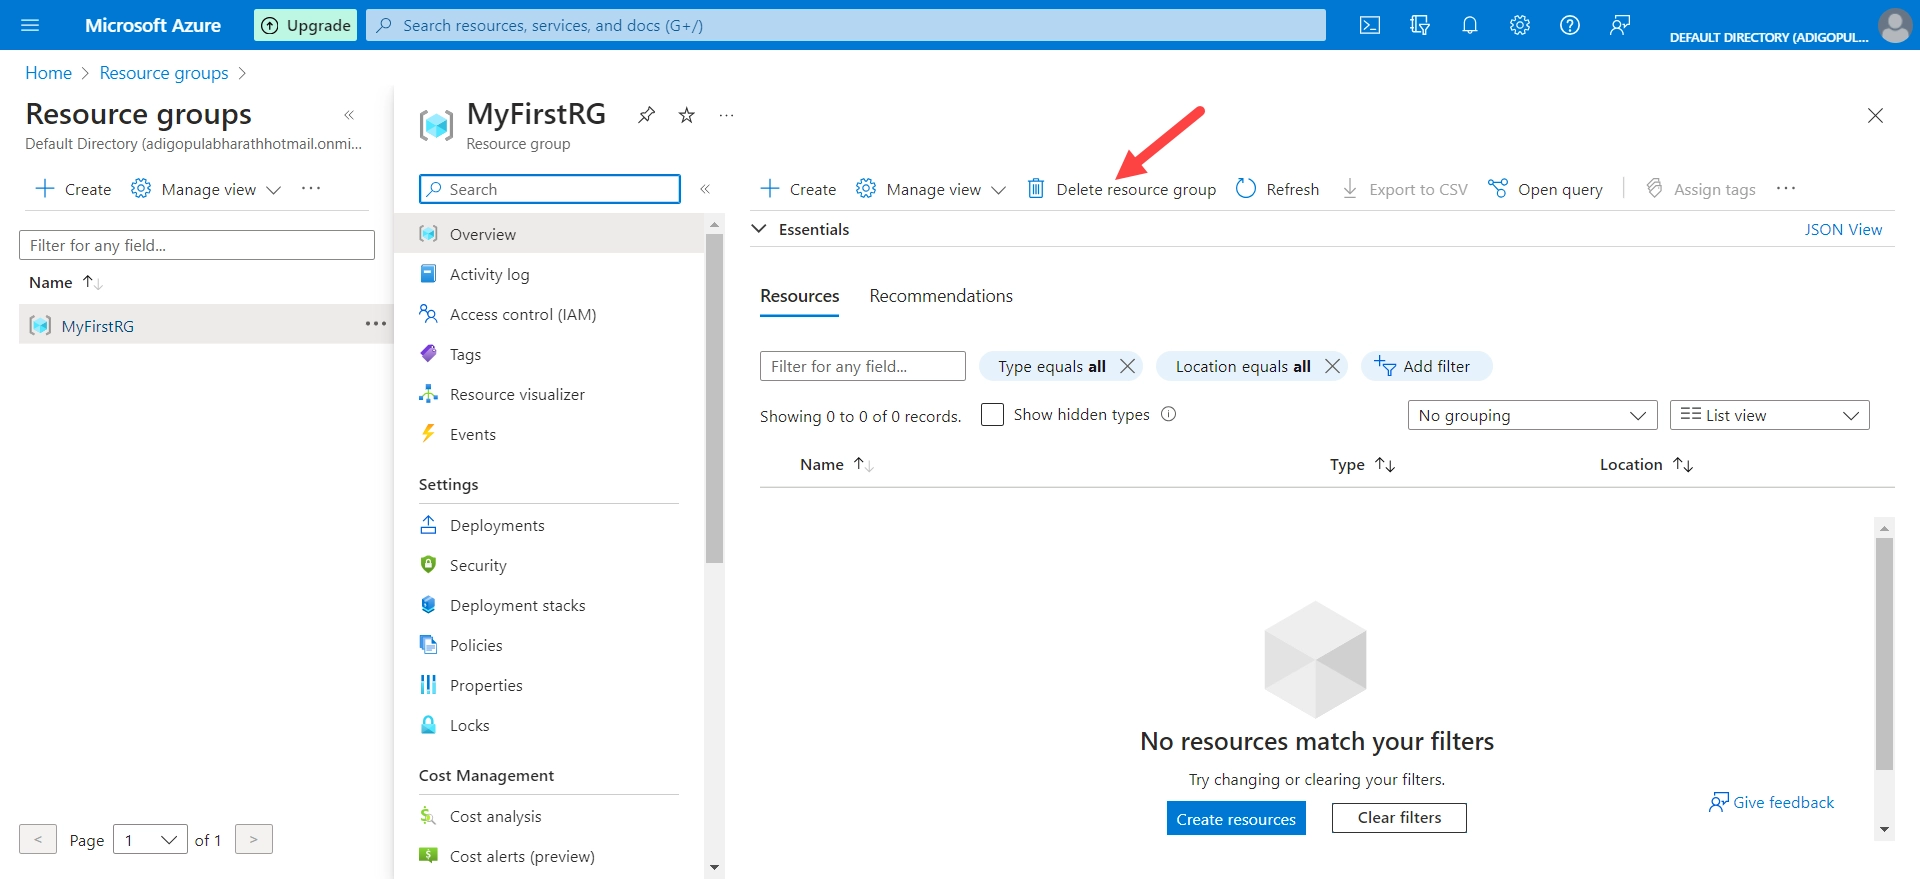 how to delete resource group in azure